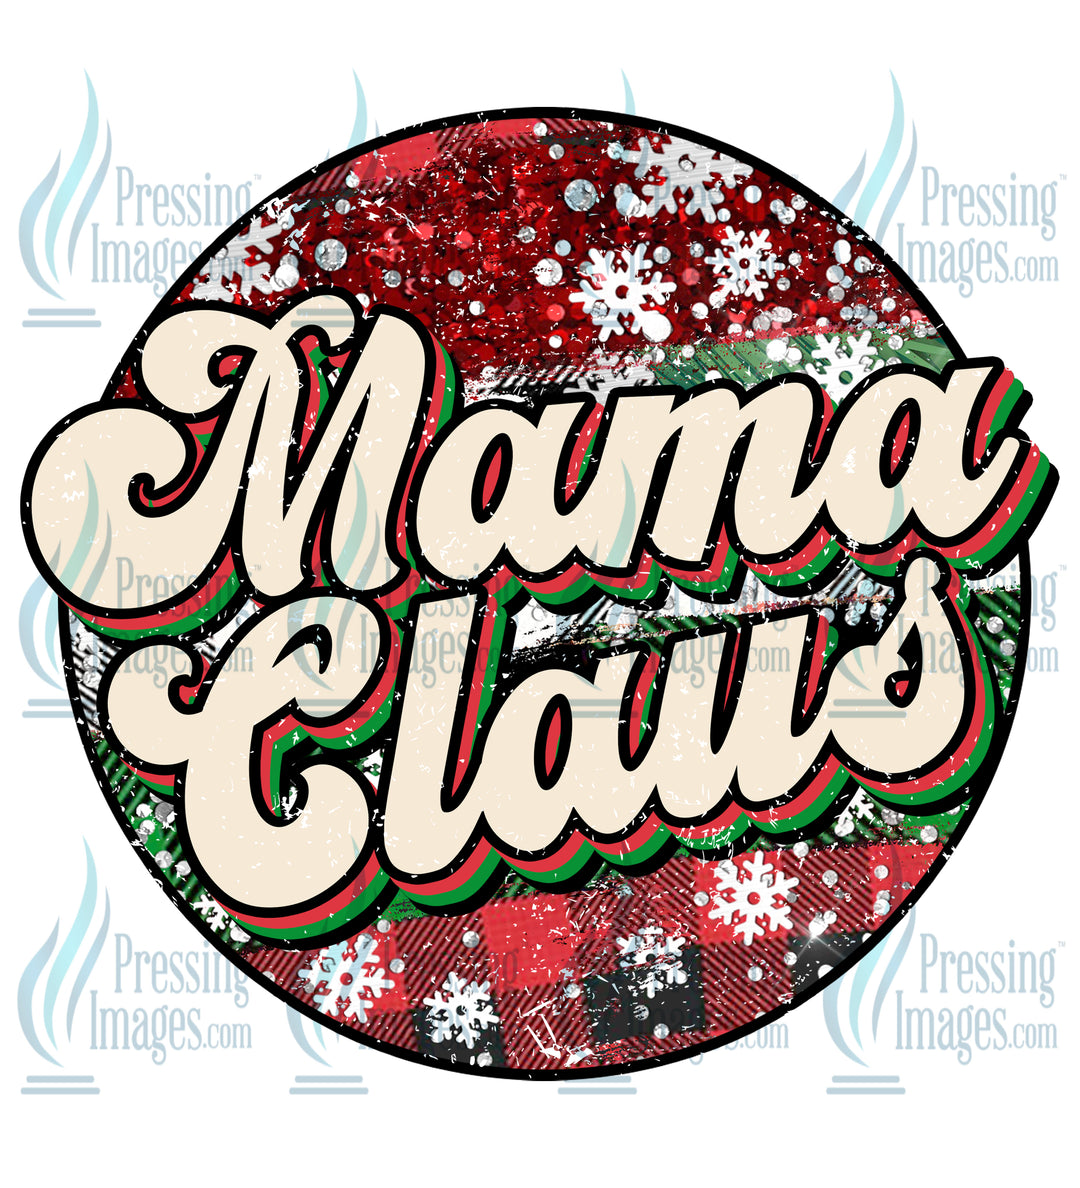 DTF: 237 Mama Claus